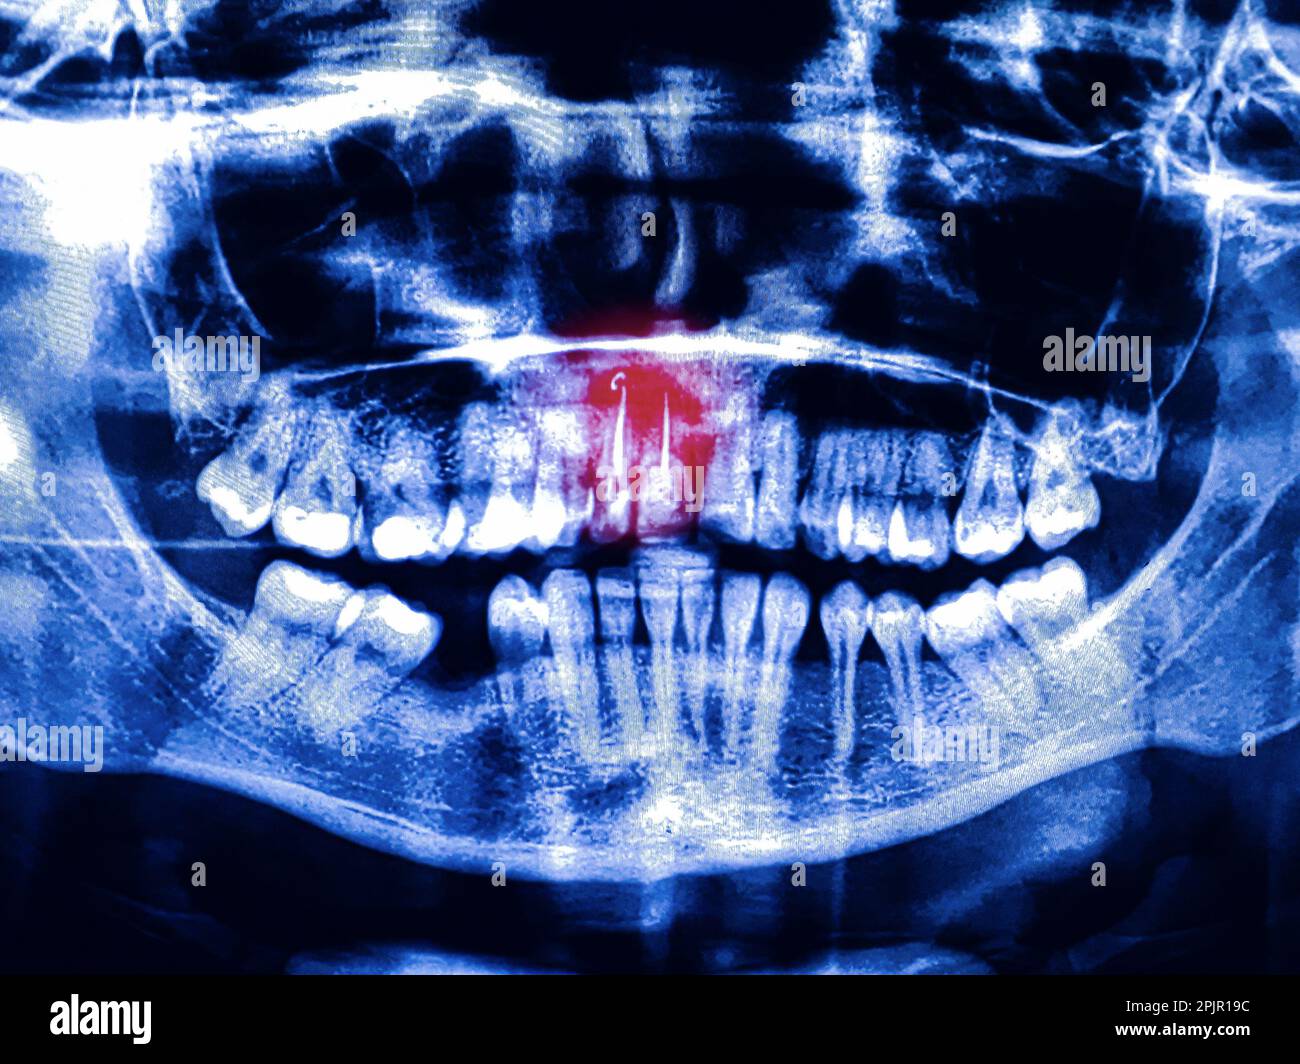 Panoramic dental X-Ray, two root canal treatments with red area Stock Photo